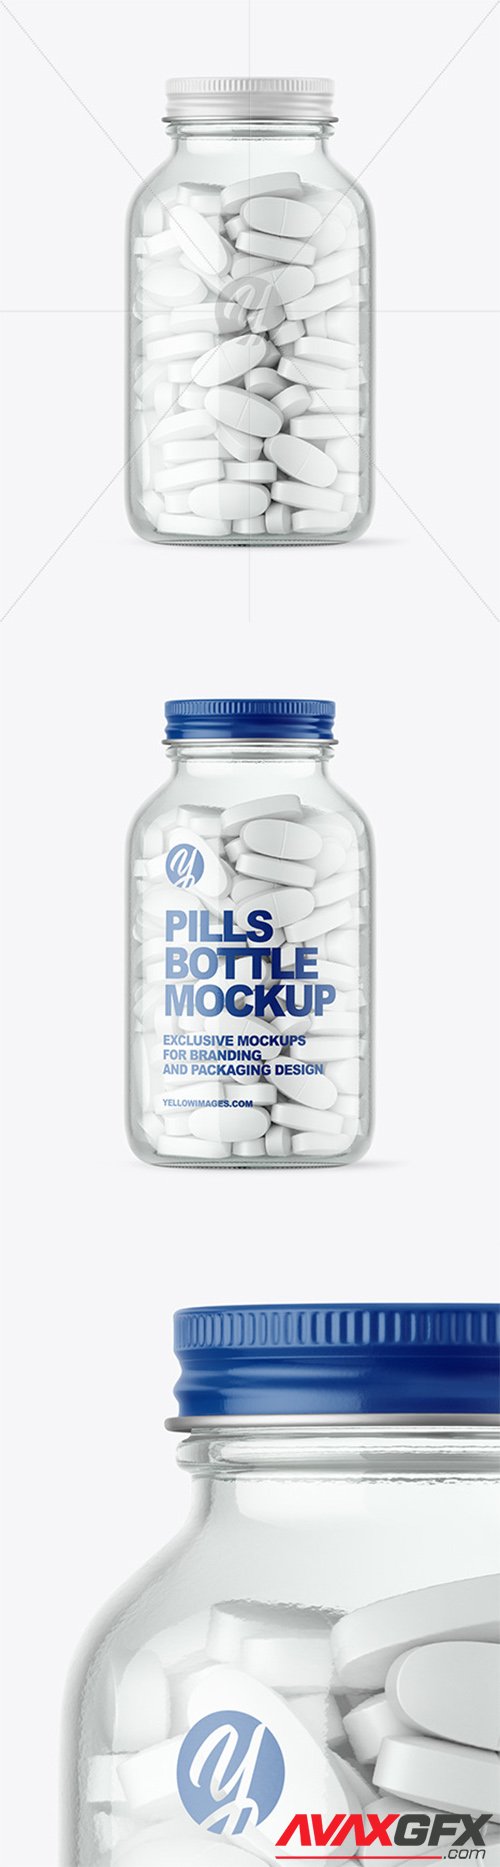 Download Clear Glass Pills Bottle Mockup 60907 Tif Avaxgfx All Downloads That You Need In One Place Graphic From Nitroflare Rapidgator PSD Mockup Templates